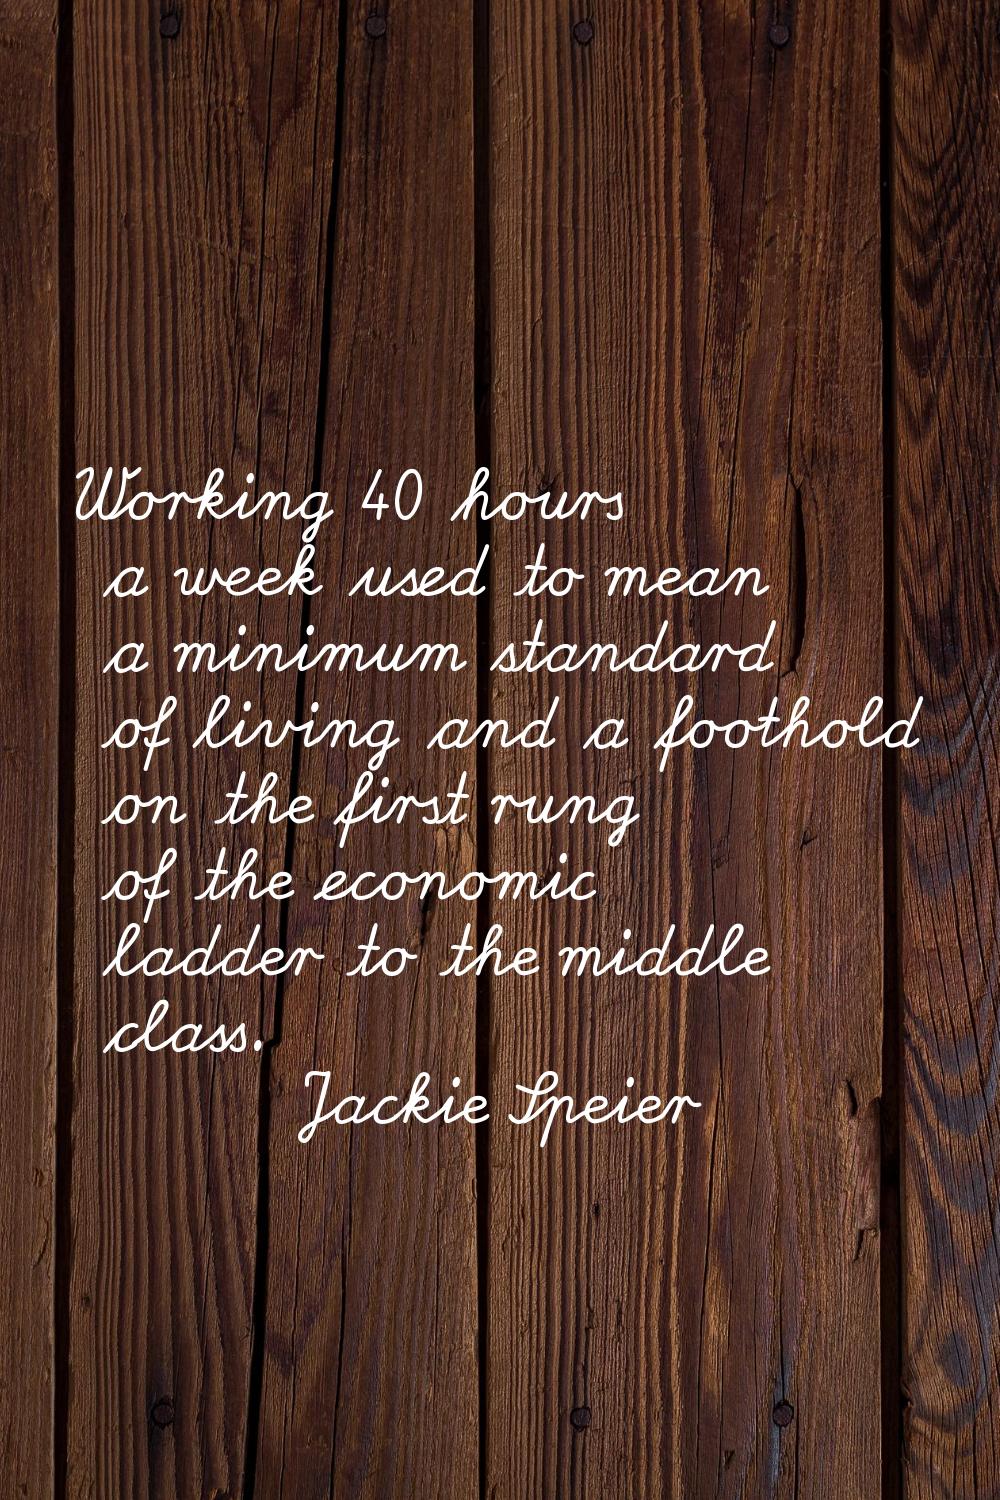 Working 40 hours a week used to mean a minimum standard of living and a foothold on the first rung 